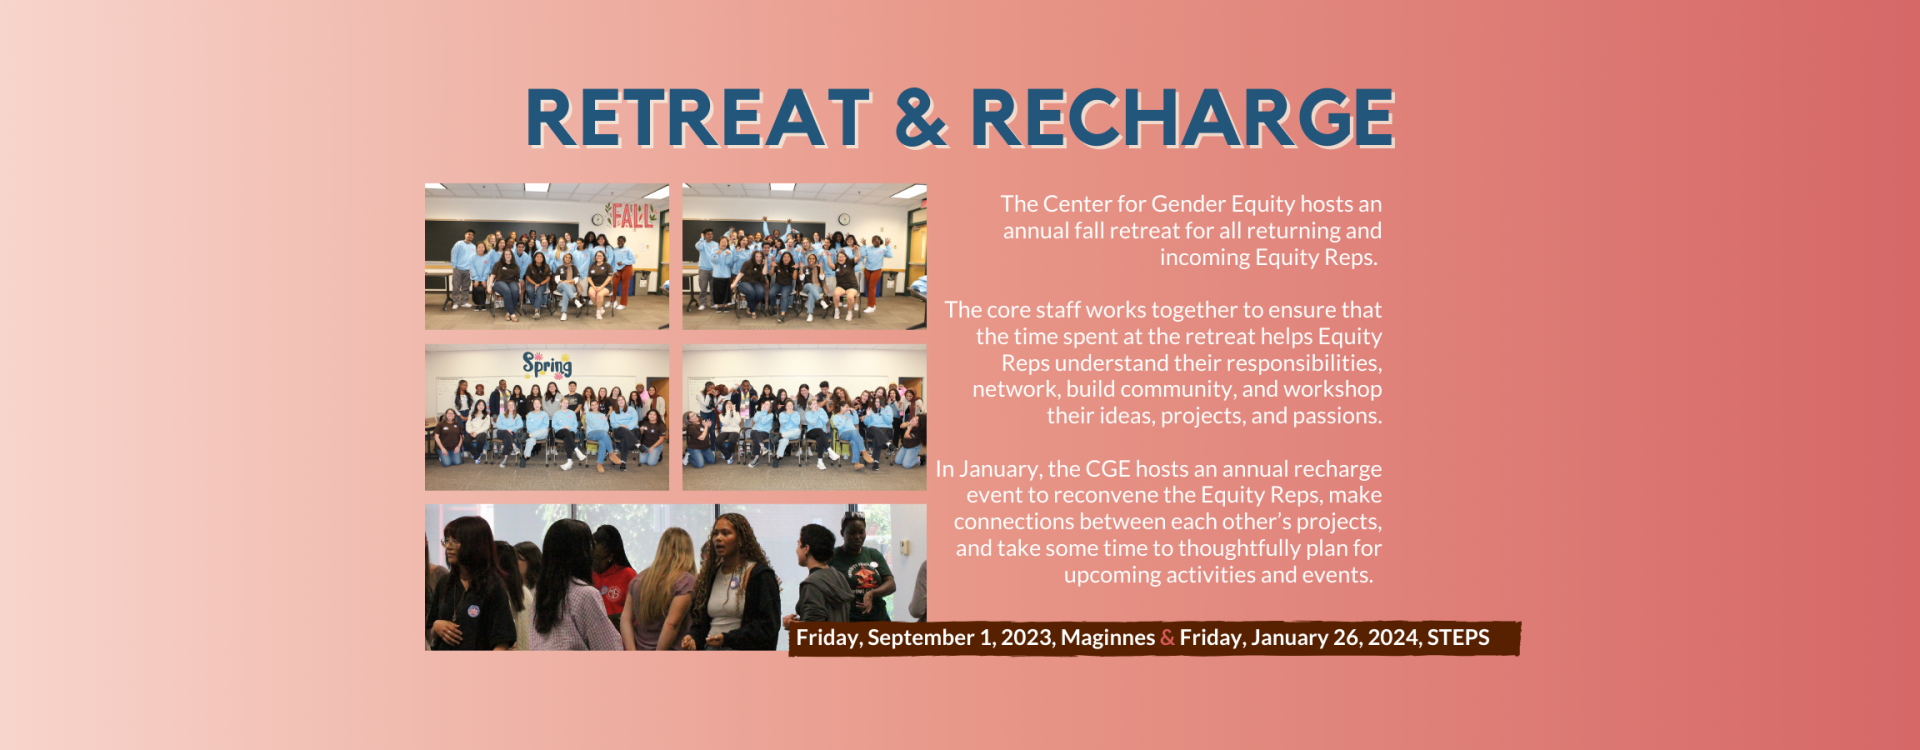 Retreat and Recharge: The Center for Gender Equity hosts an annual fall retreat for all returning and incoming Equity Reps.   The core staff works together to ensure that the time spent at the retreat helps Equity Reps understand their responsibilities, network, build community, and workshop their ideas, projects, and passions.  In January, the CGE hosts an annual recharge event to reconvene the Equity Reps, make connections between each other’s projects, and take some time to thoughtfully plan for upcoming